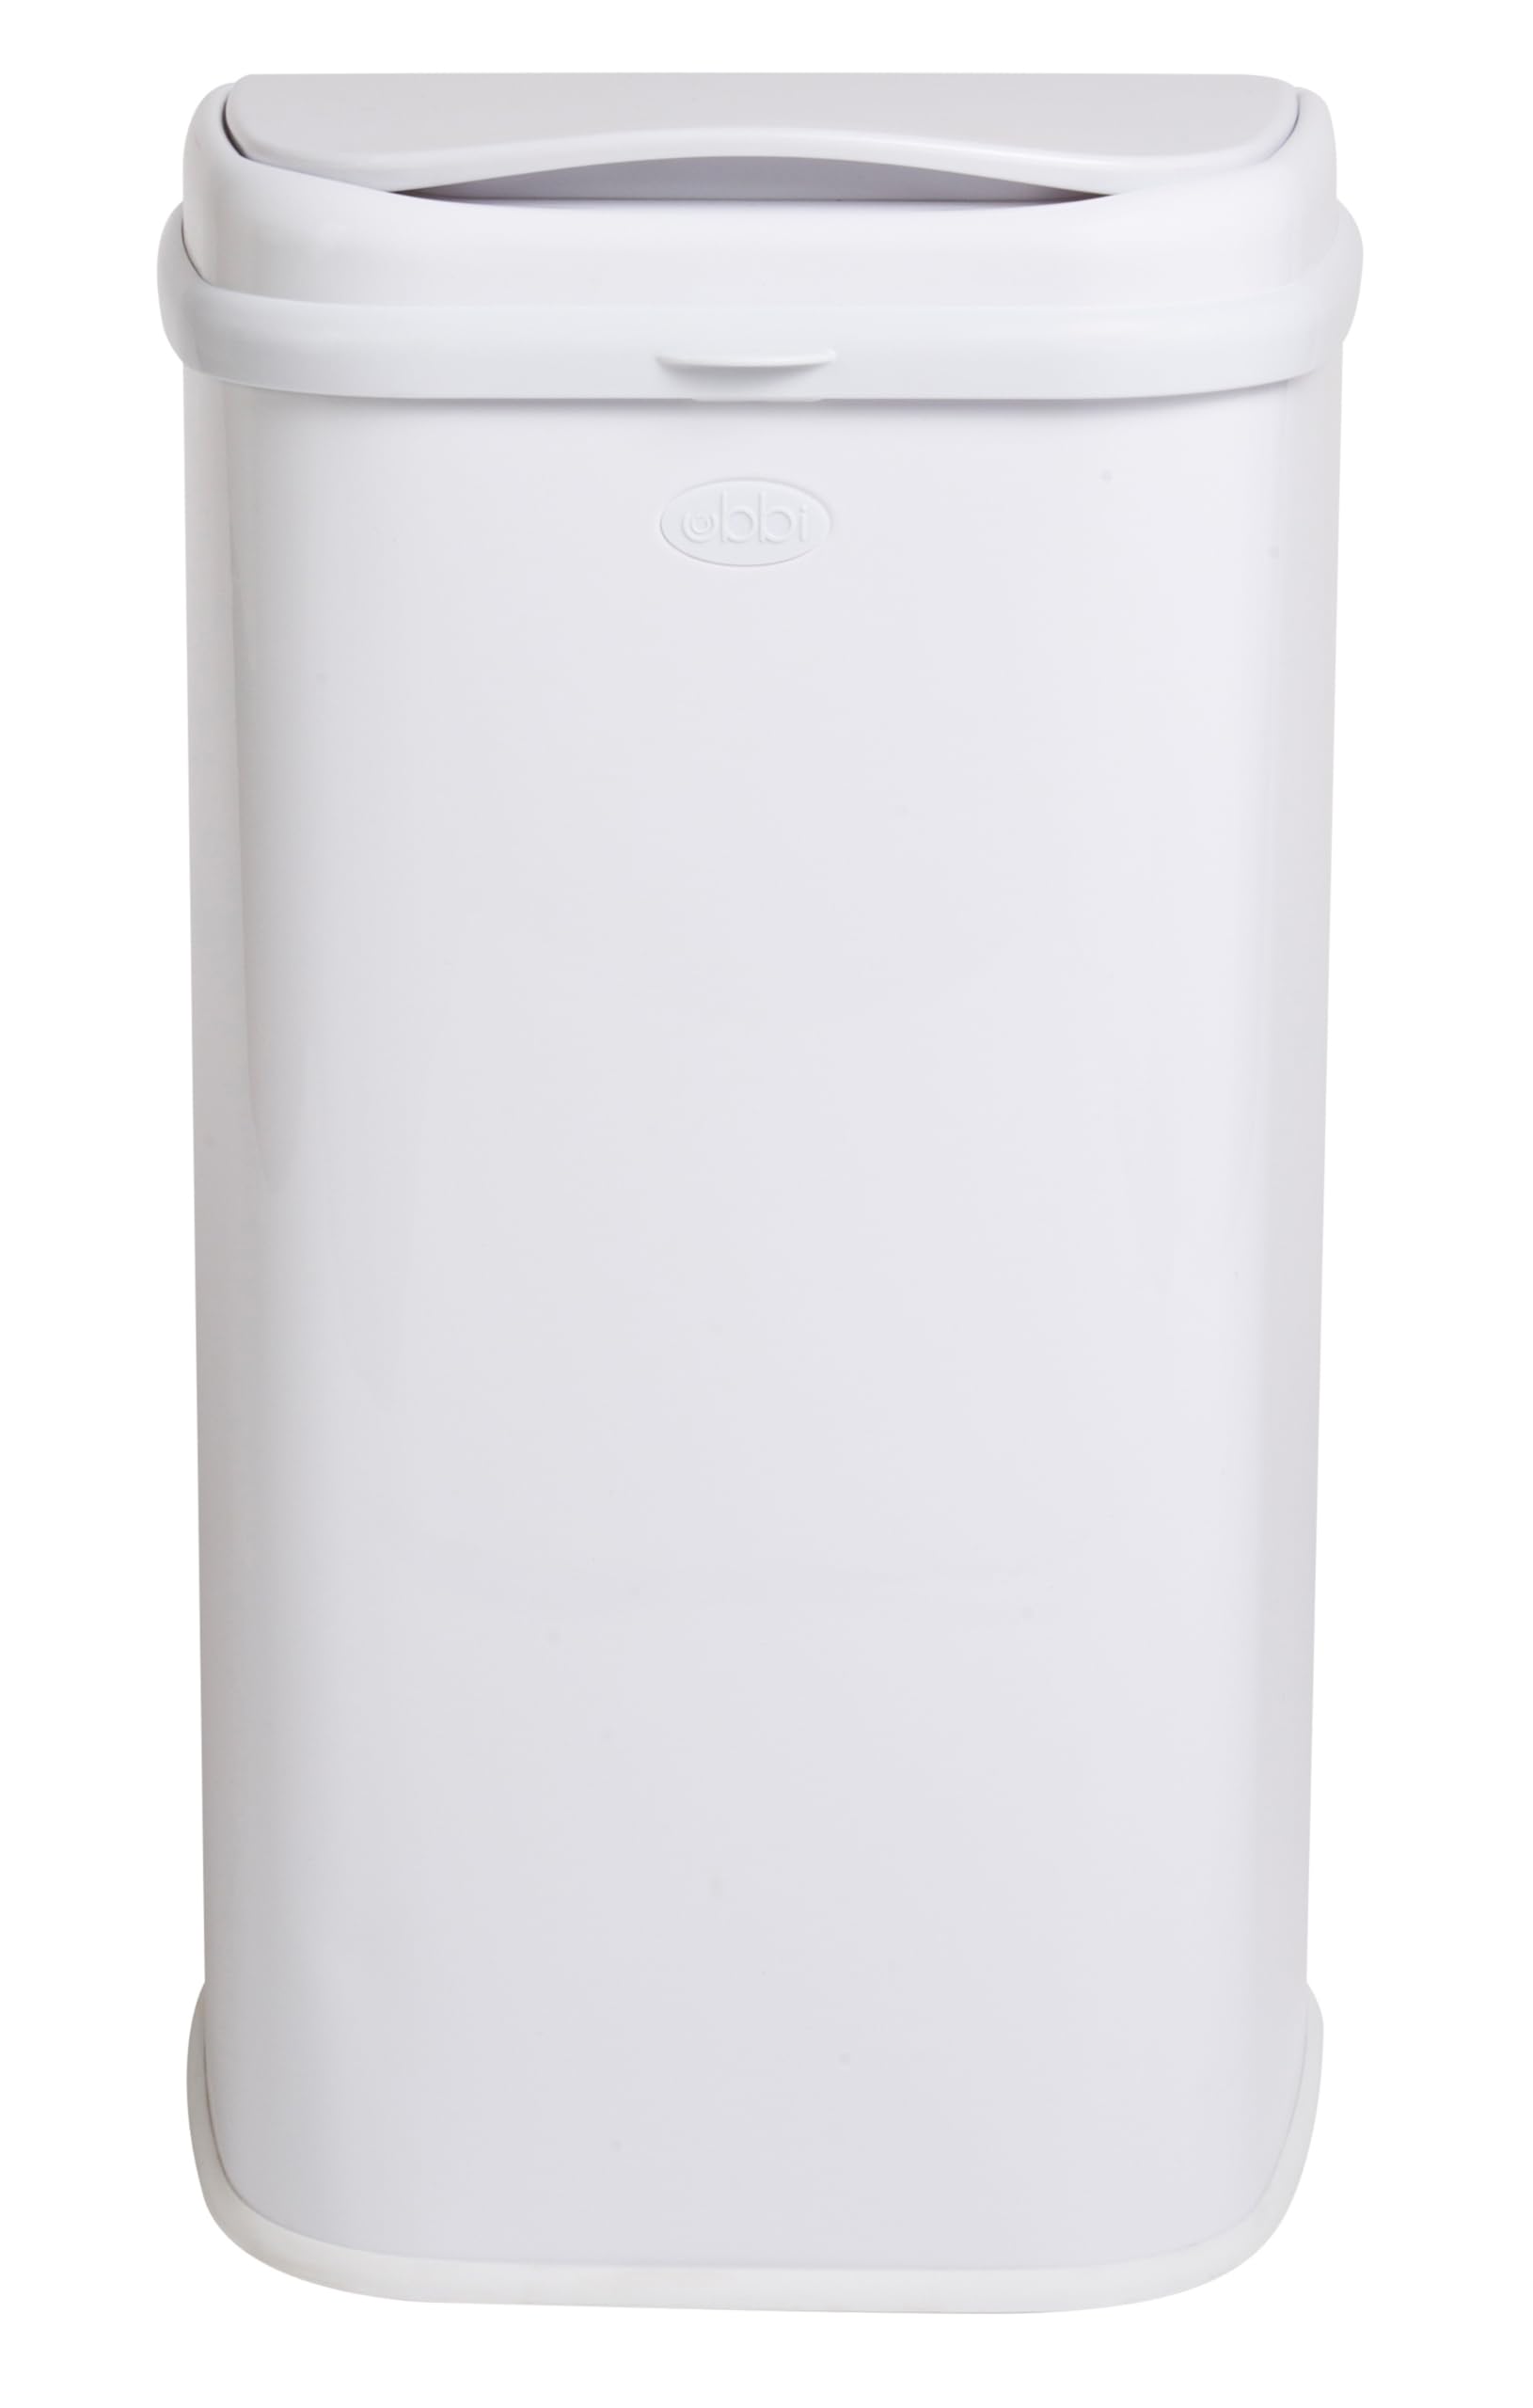 Ubbi Adult Diaper Pail, Stainless Steel Odor Locking, No Special Bag Required, Awards-Winning, Modern Design, White